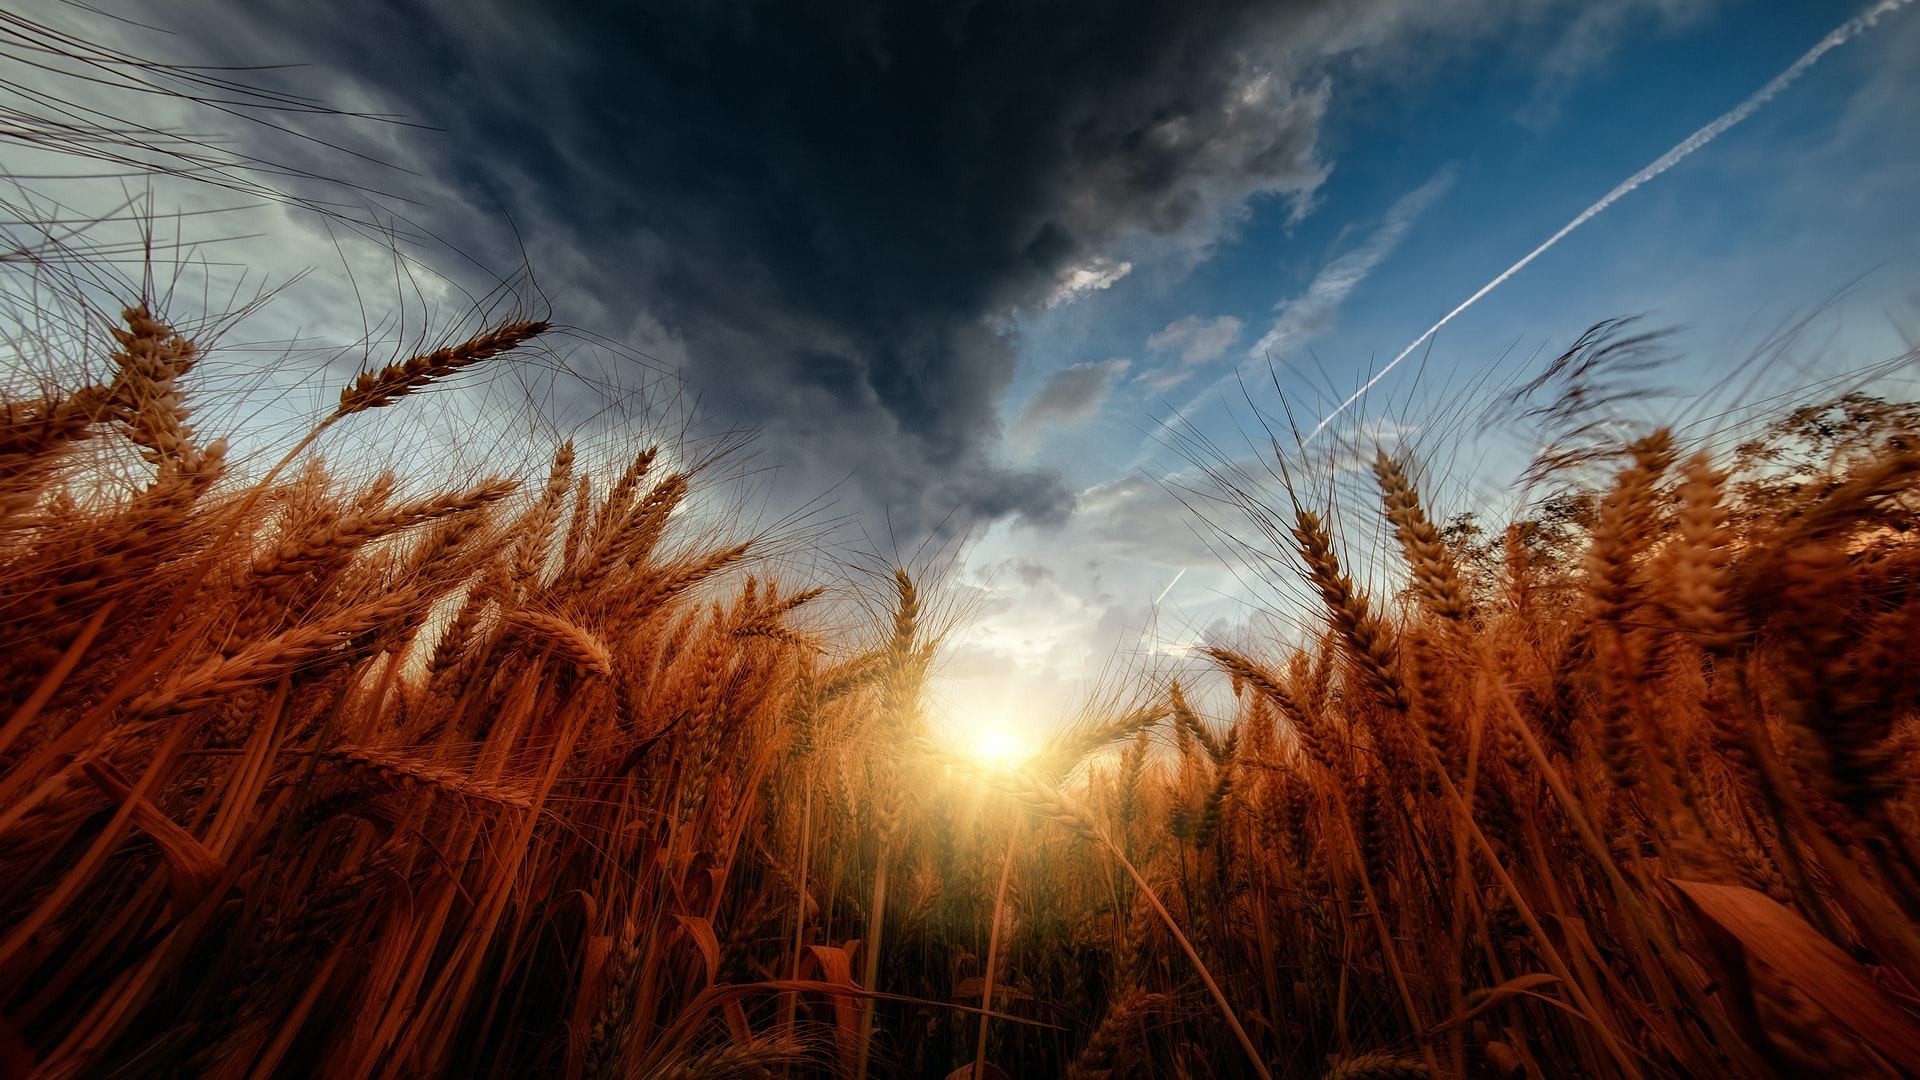 Crop Prices Soar Amid Russian Invasion, Drought Conditions, and Rising Fertilizer Costs